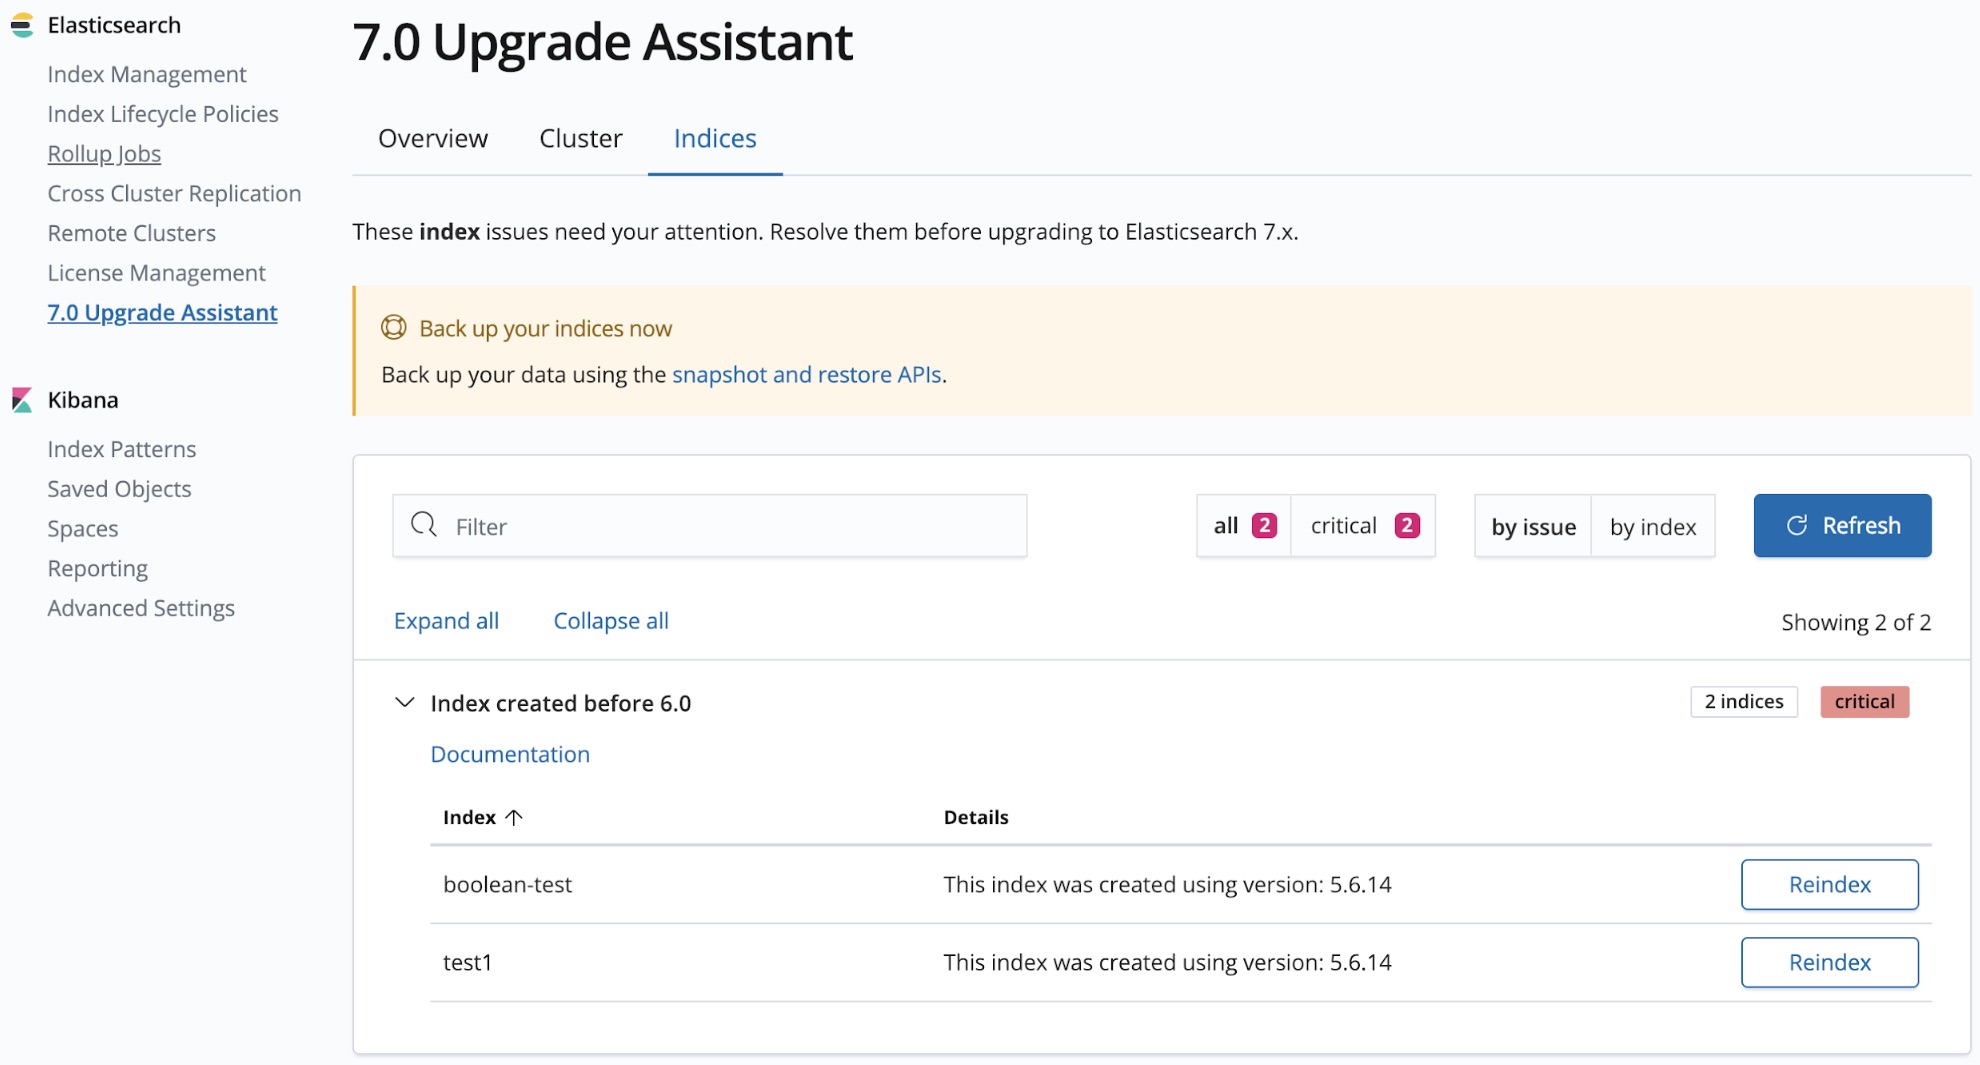 Upgrade Assistant Indices tab